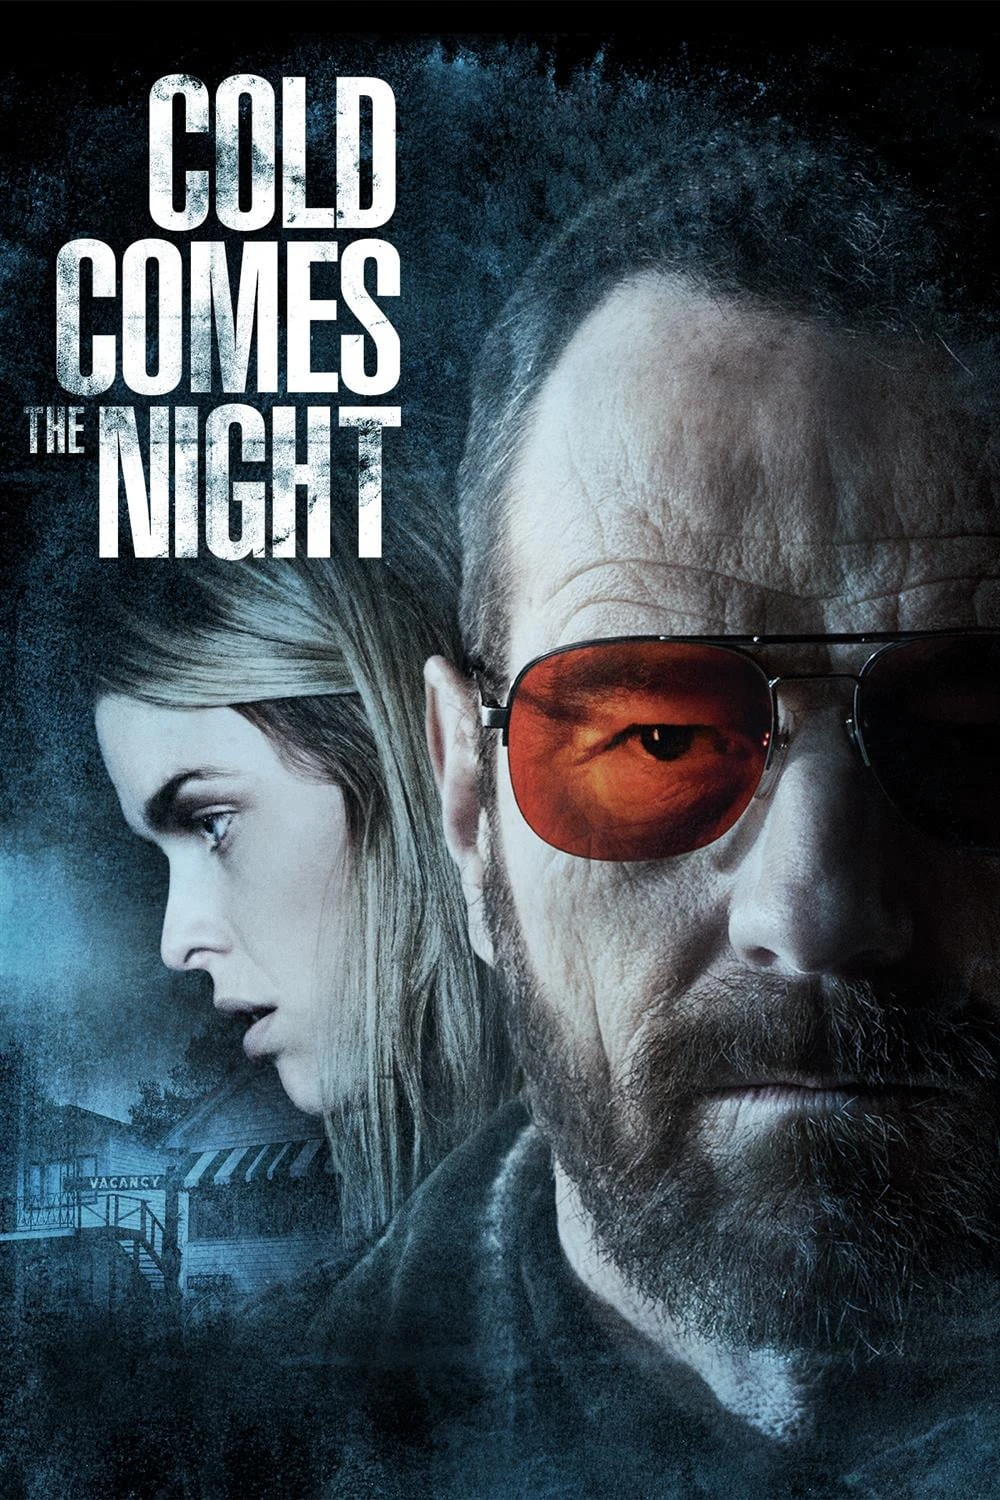 Cold Comes the Night | Cold Comes the Night (2013)